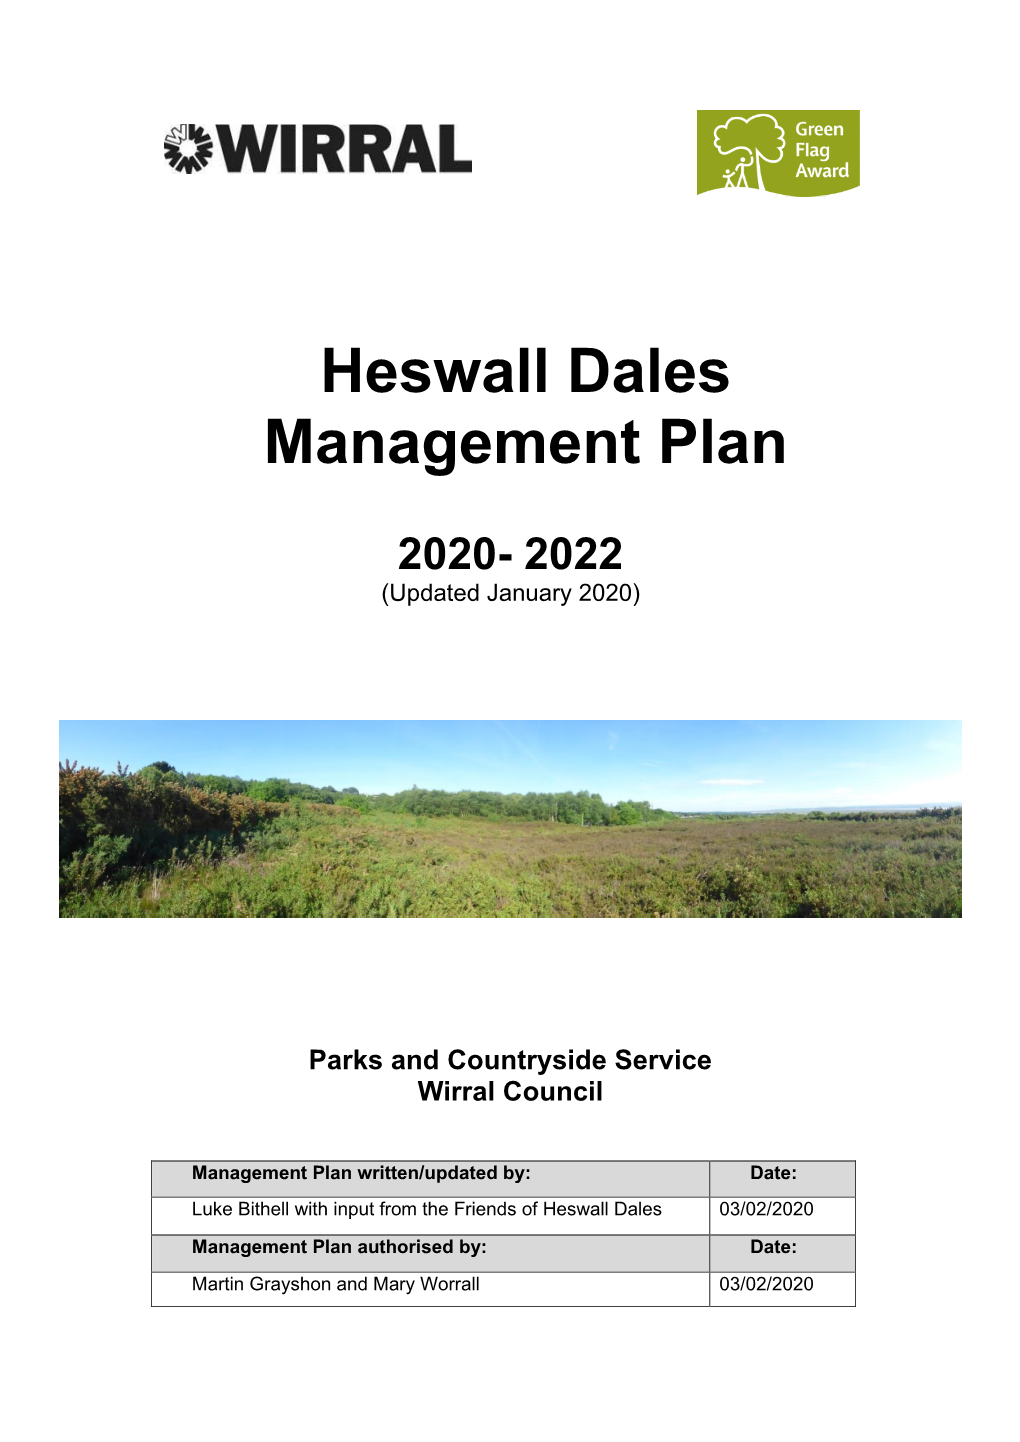 Heswall Dales Management Plan